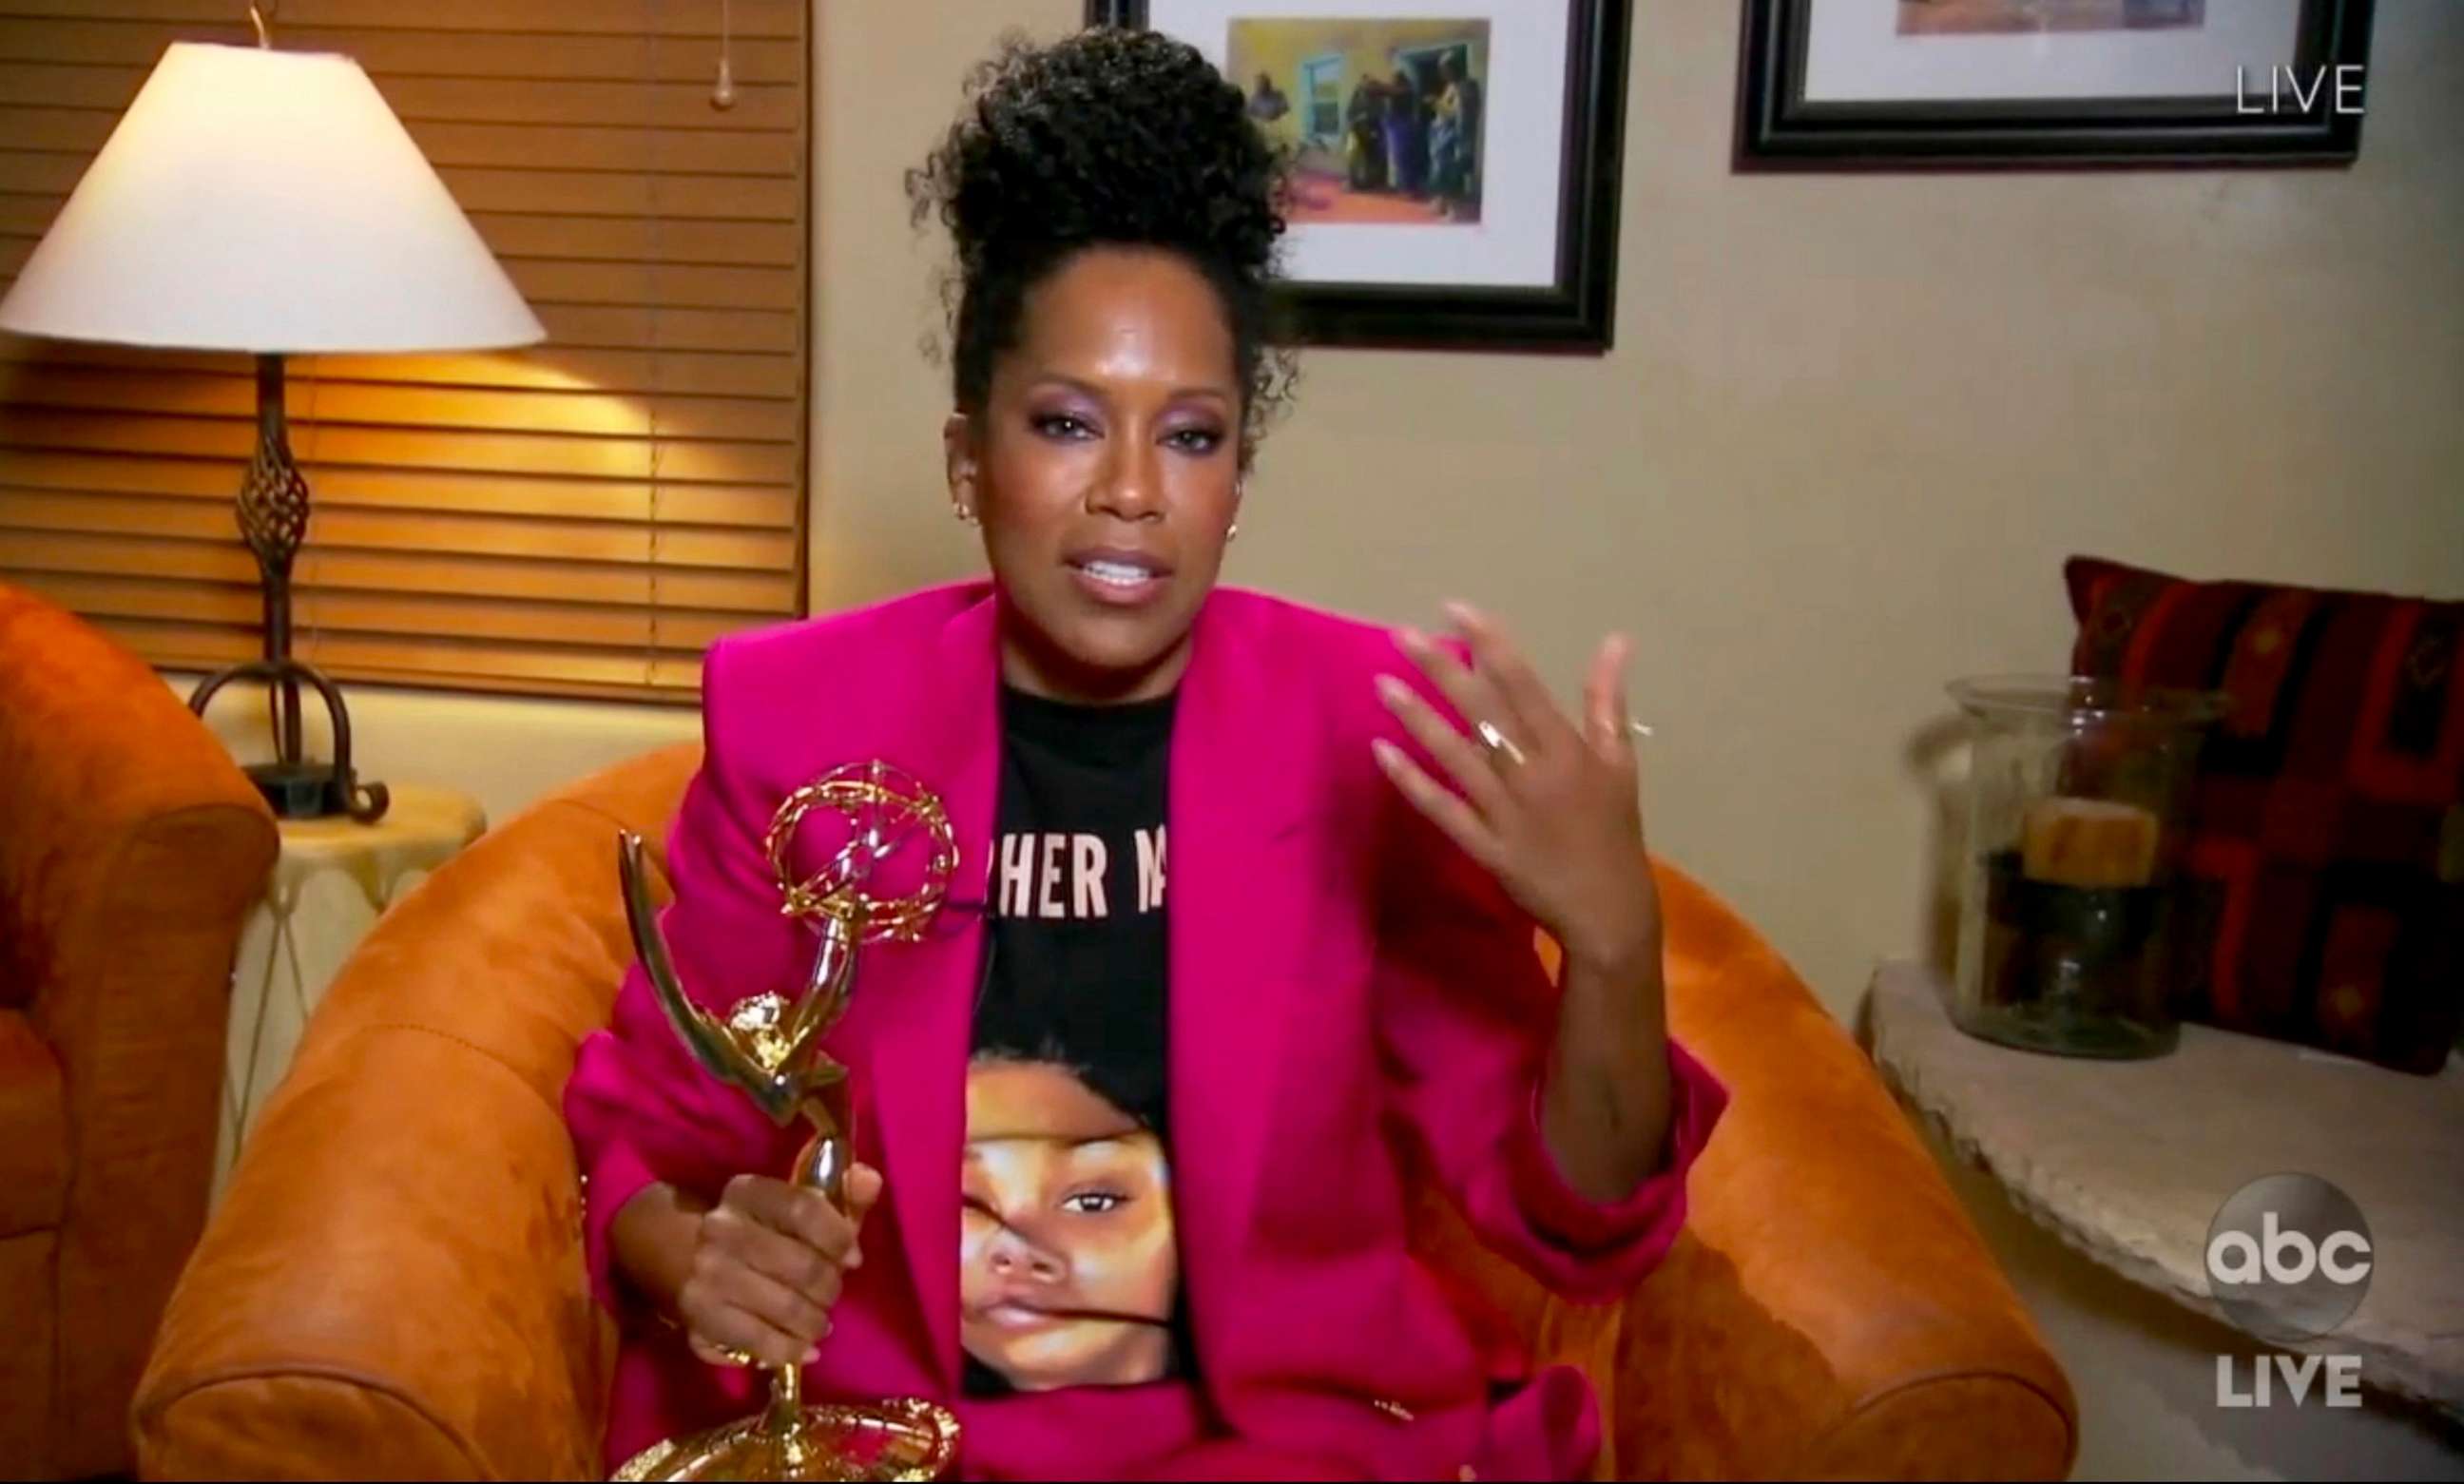 PHOTO: In this video grab, Regina King accepts the award for outstanding lead actress in a limited series or movie for "Watchmen" during the 72nd Emmy Awards broadcast airing on ABC, Sept. 20, 2020.